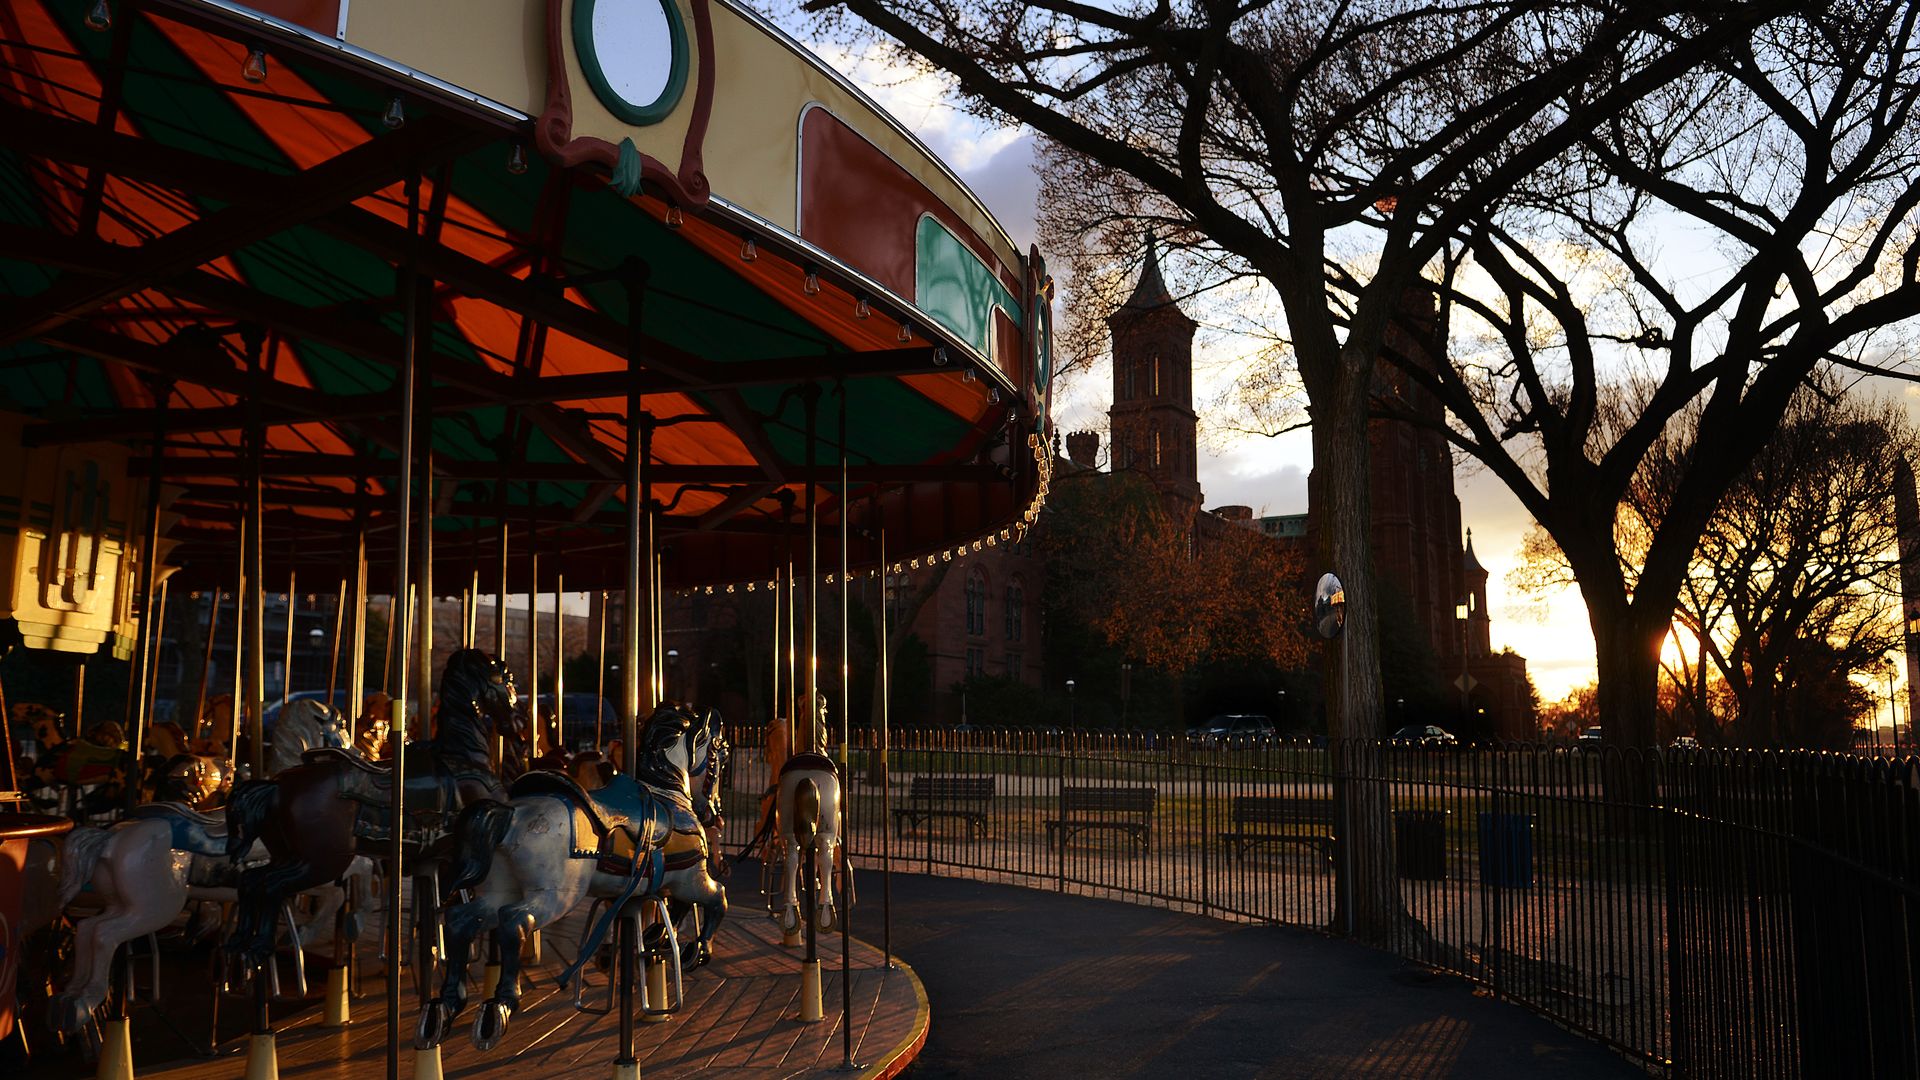 The carousel during sunset 